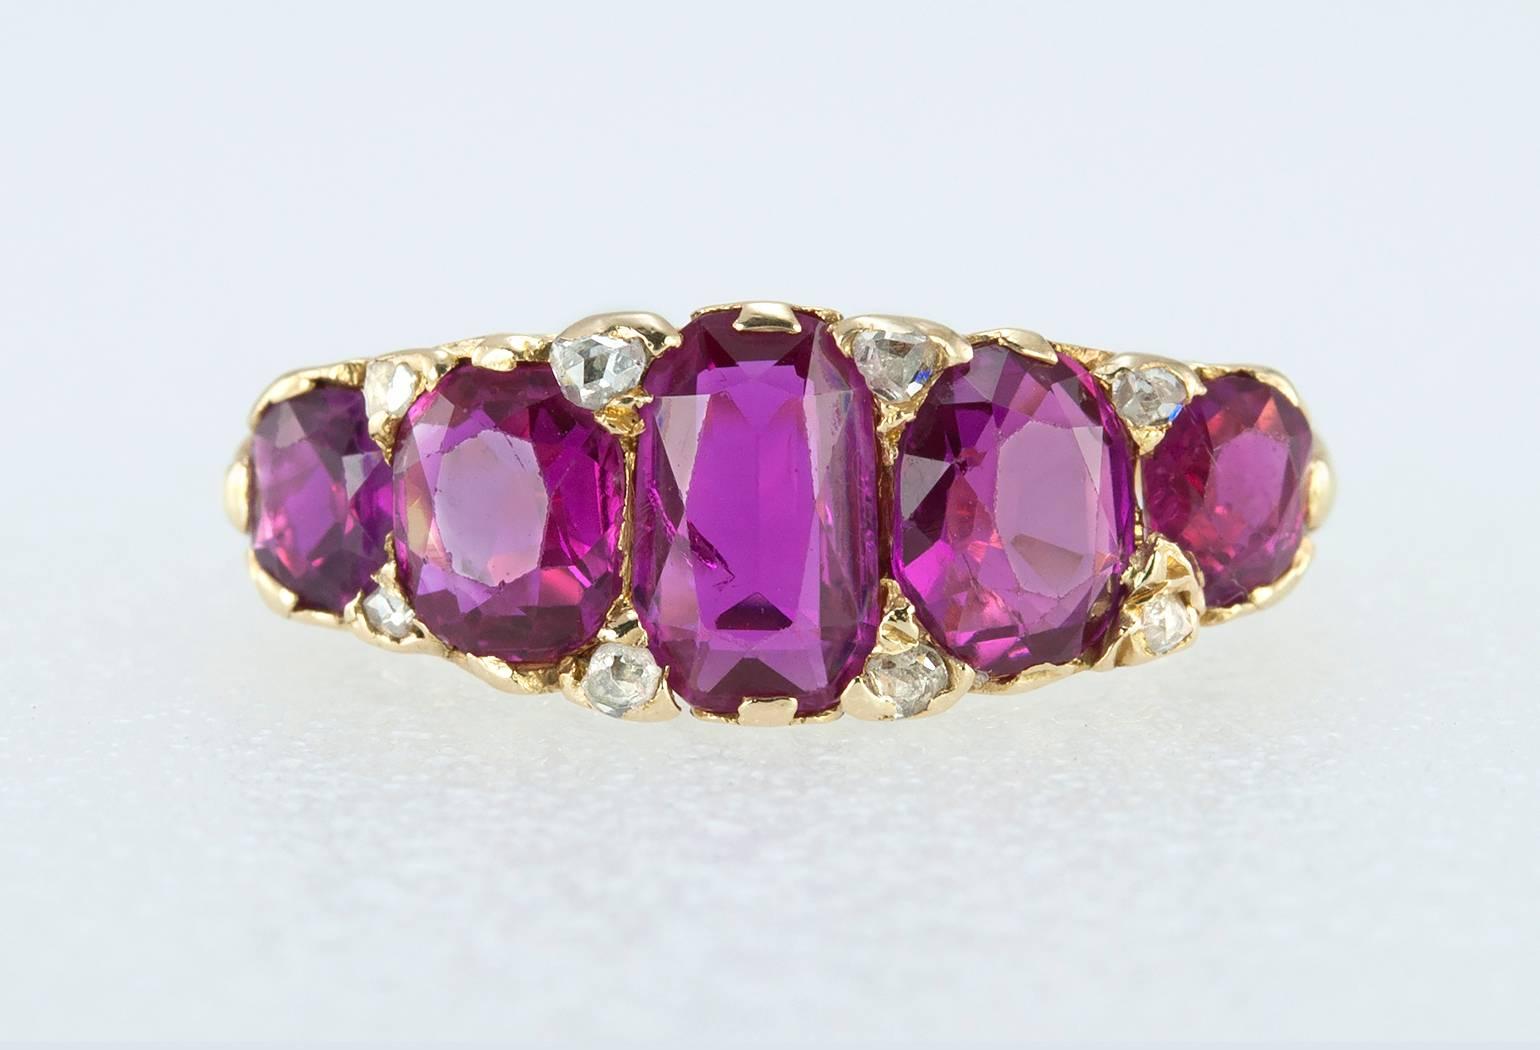 A beautiful Victorian five-stone ruby ring in 18 karat yellow gold.  The rubies are natural, Burmese rubies (per GIA certificate) with a stunning color! In between the rubies, there are 8 rose cut diamonds that give a glimmer of sparkle.  Circa